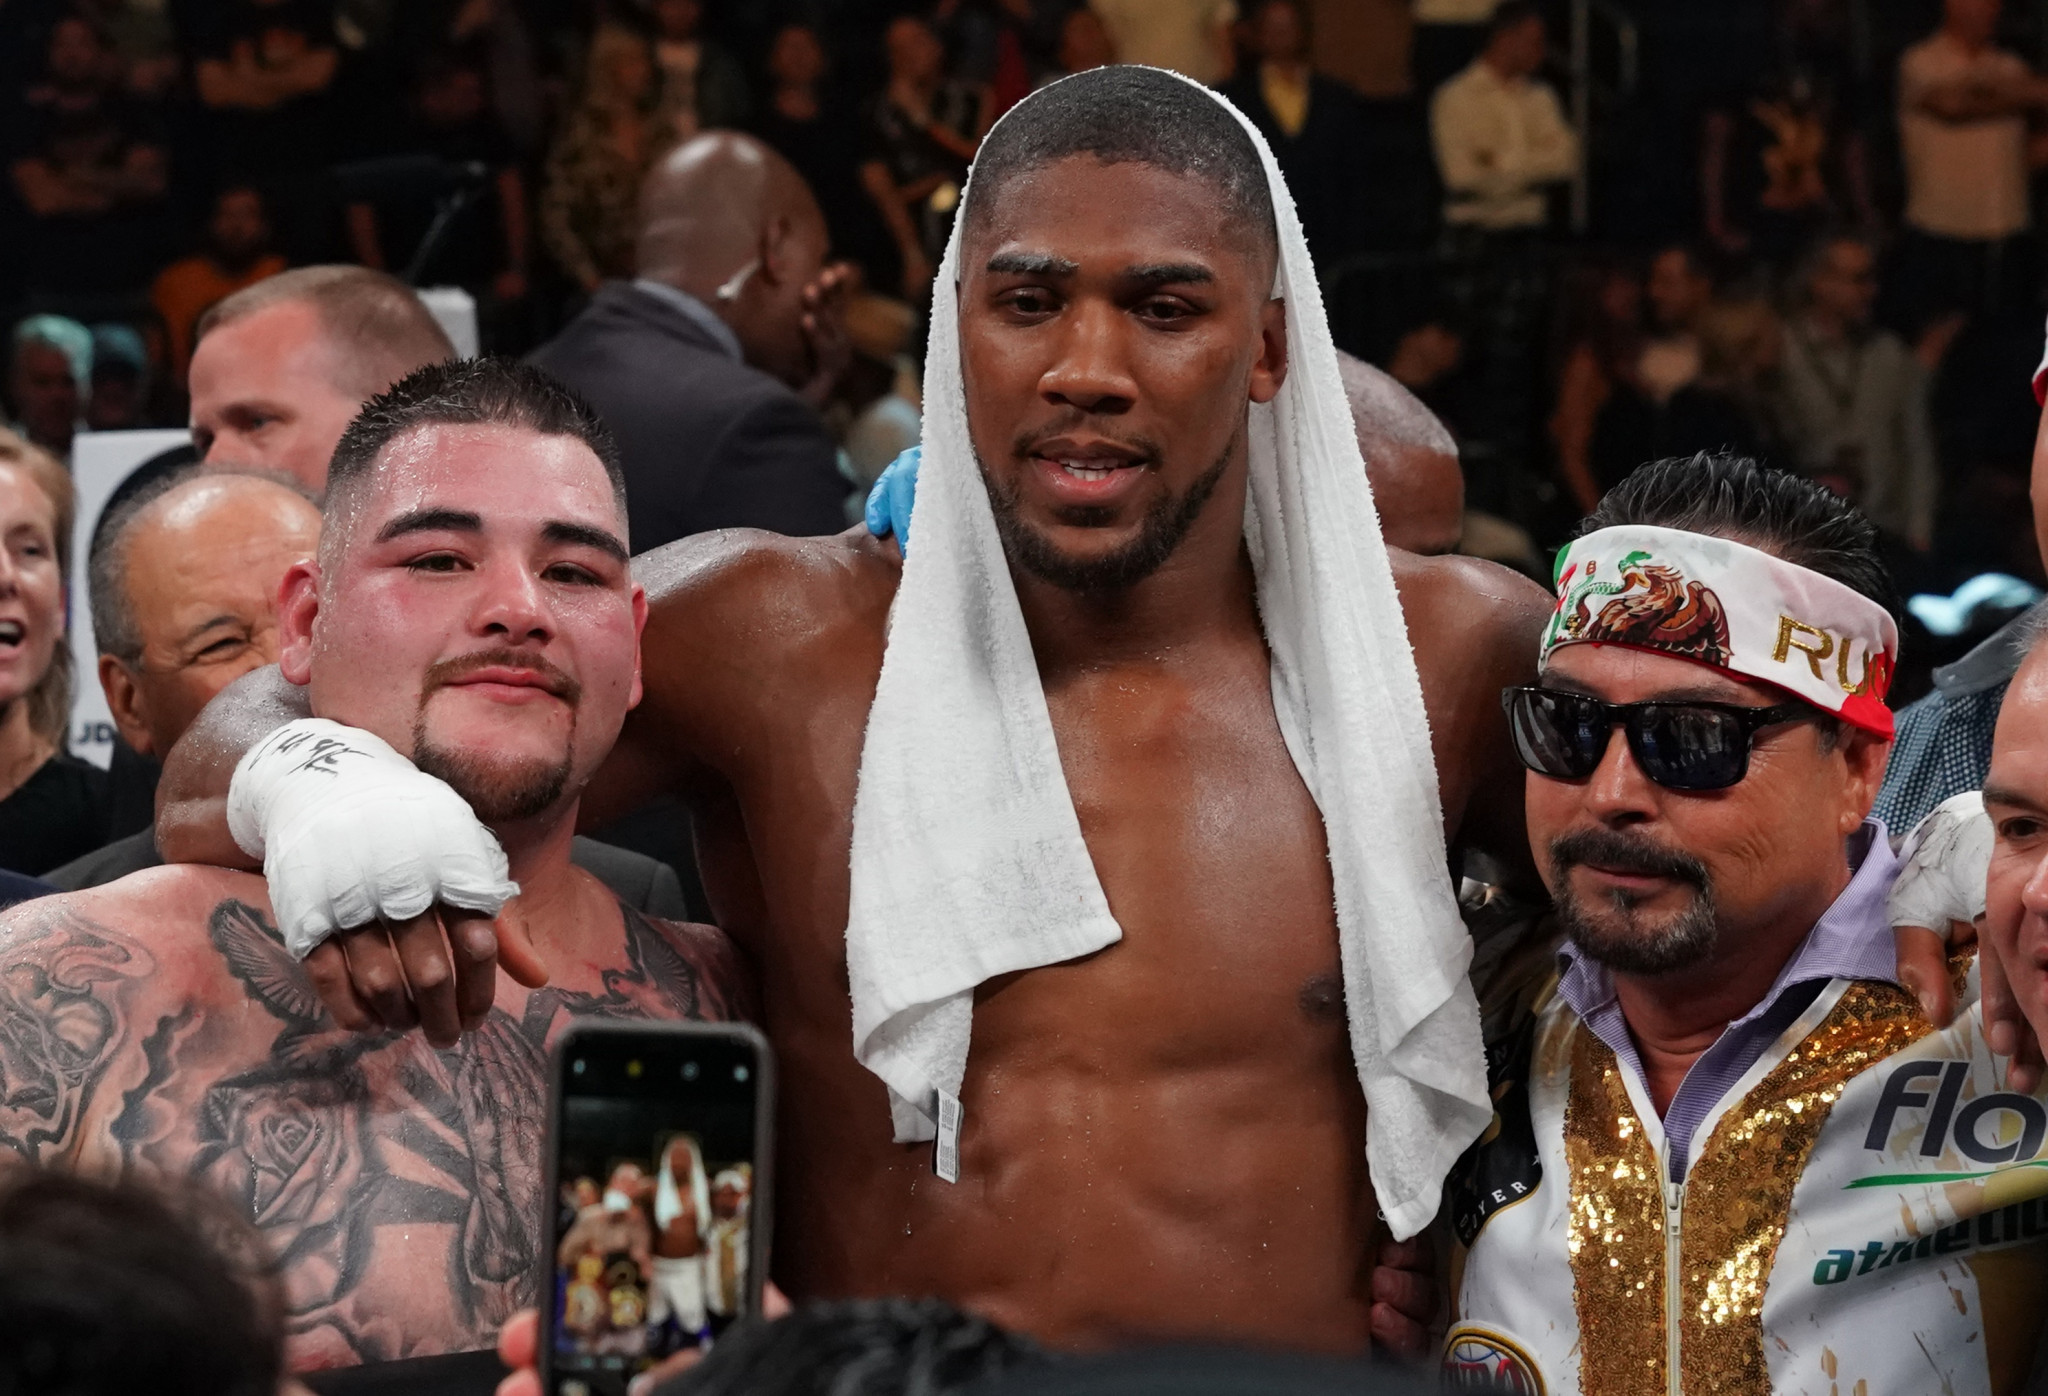 Rather than appearing upset by his shock defeat, Anthony Joshua happily posed with pictures with the man who beat him - Mexico's unfancied Andy Ruiz jnr ©Getty Images